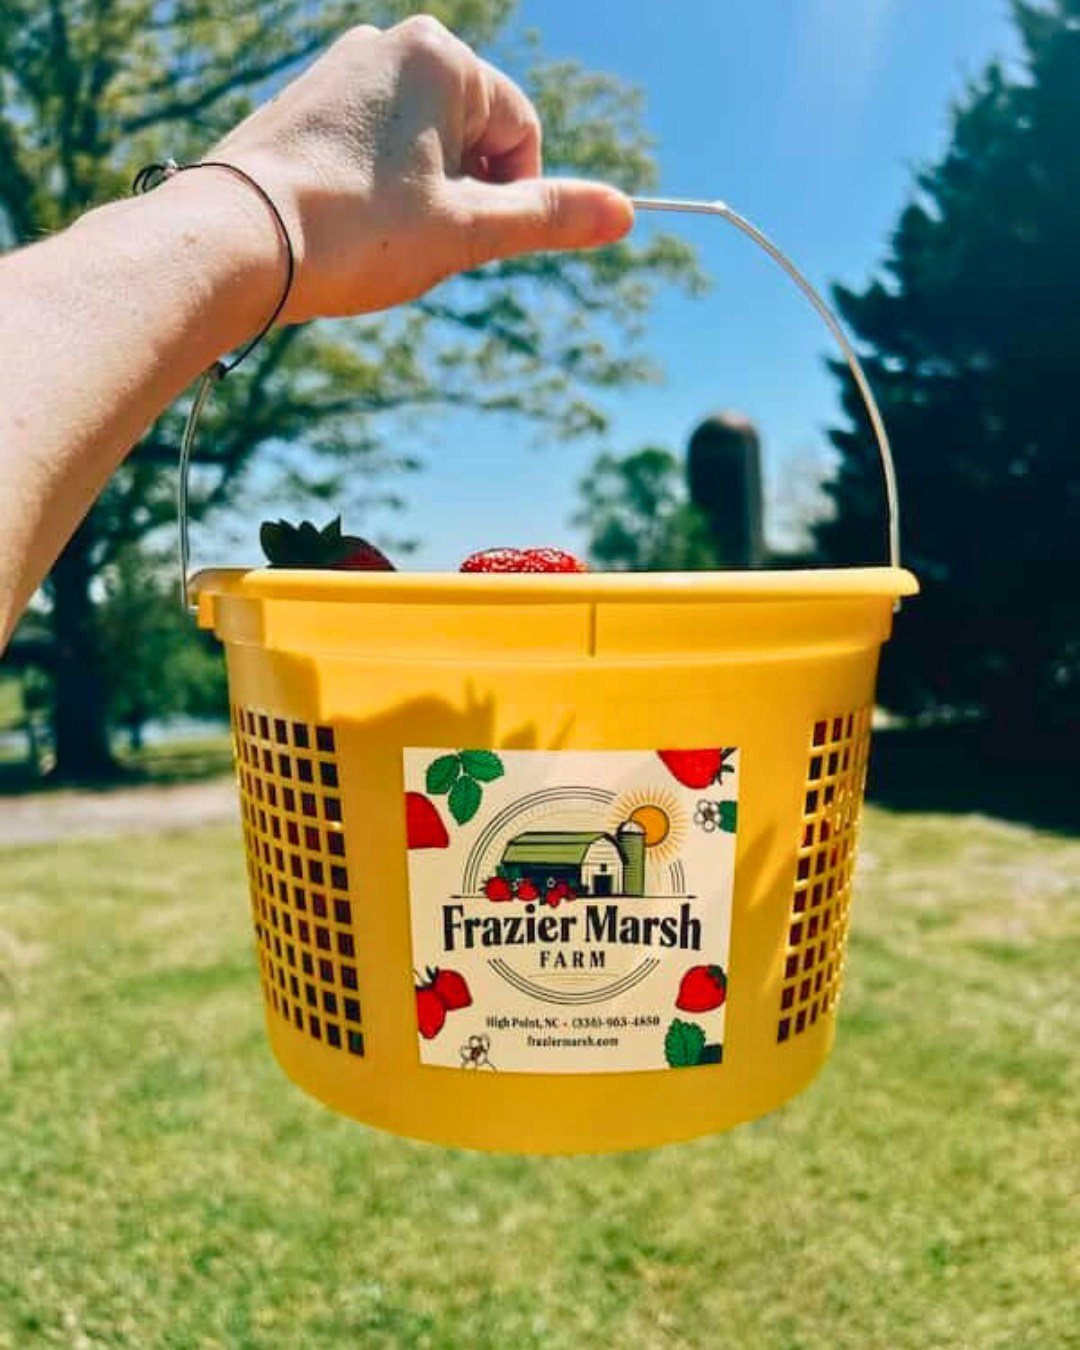 One of the best parts about spring has to be berry season! 🍓If you&rsquo;re in the High Point area, head to Frazier Marsh Farm to find the best berries. Fresh pre-picked strawberries are now available by the gallon or quart and u-pick is coming soon